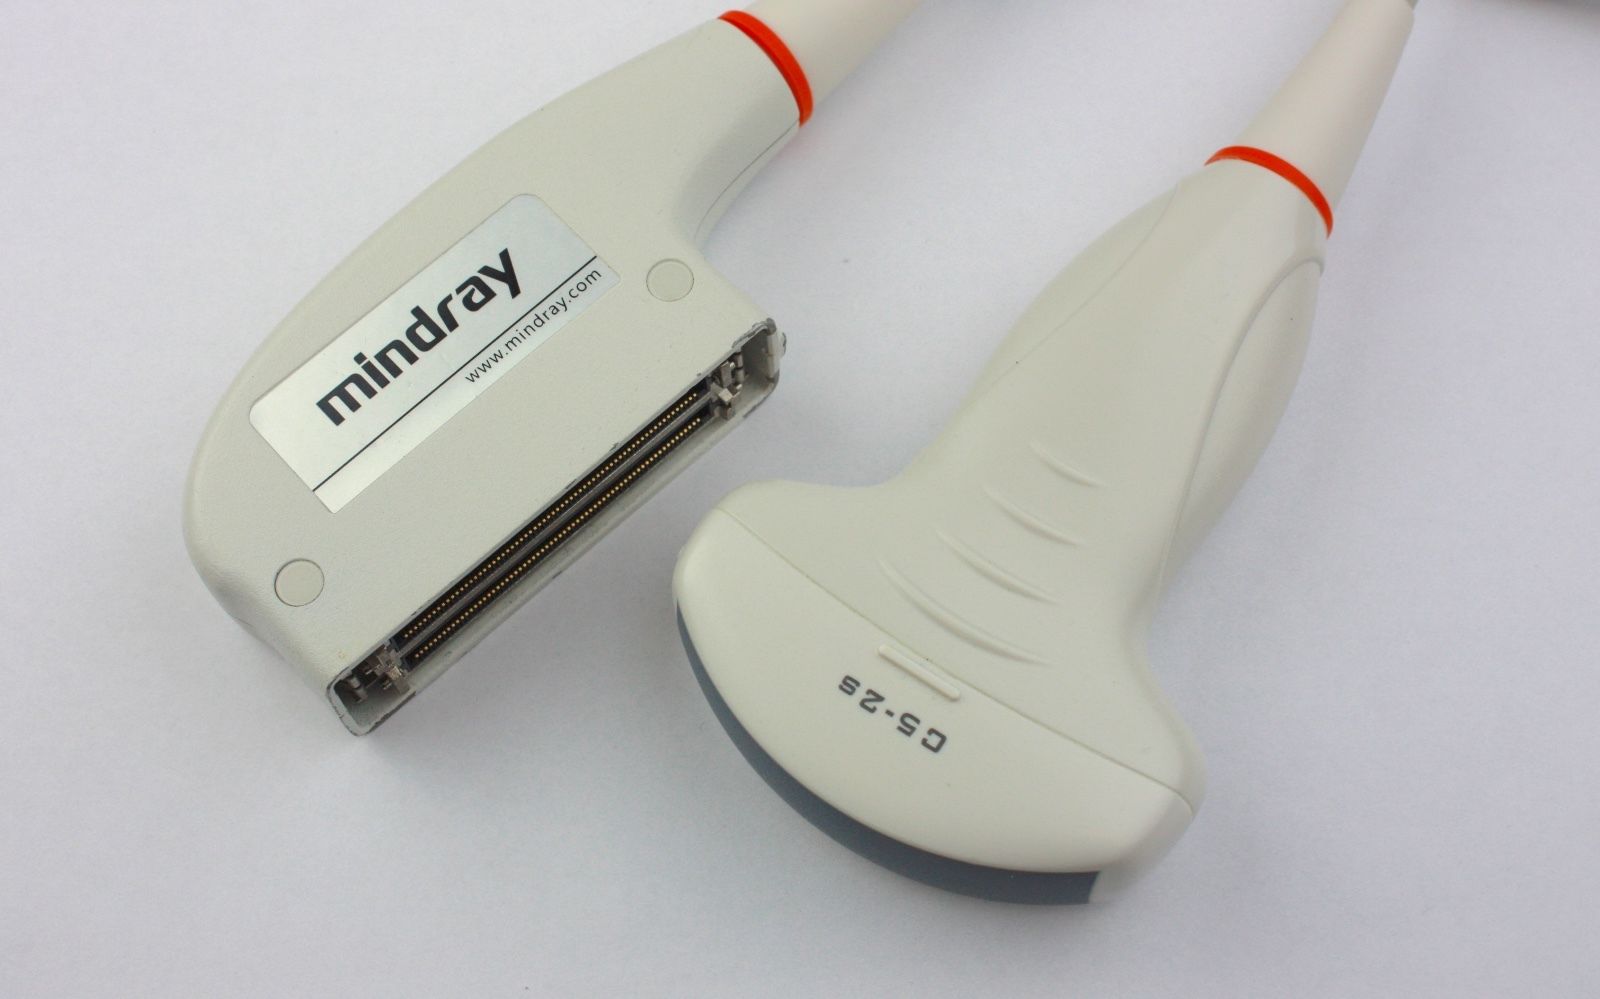 C5-2s Convex Array Transducer Probe, 2-5MHz, for Mindray Ultrasound DIAGNOSTIC ULTRASOUND MACHINES FOR SALE